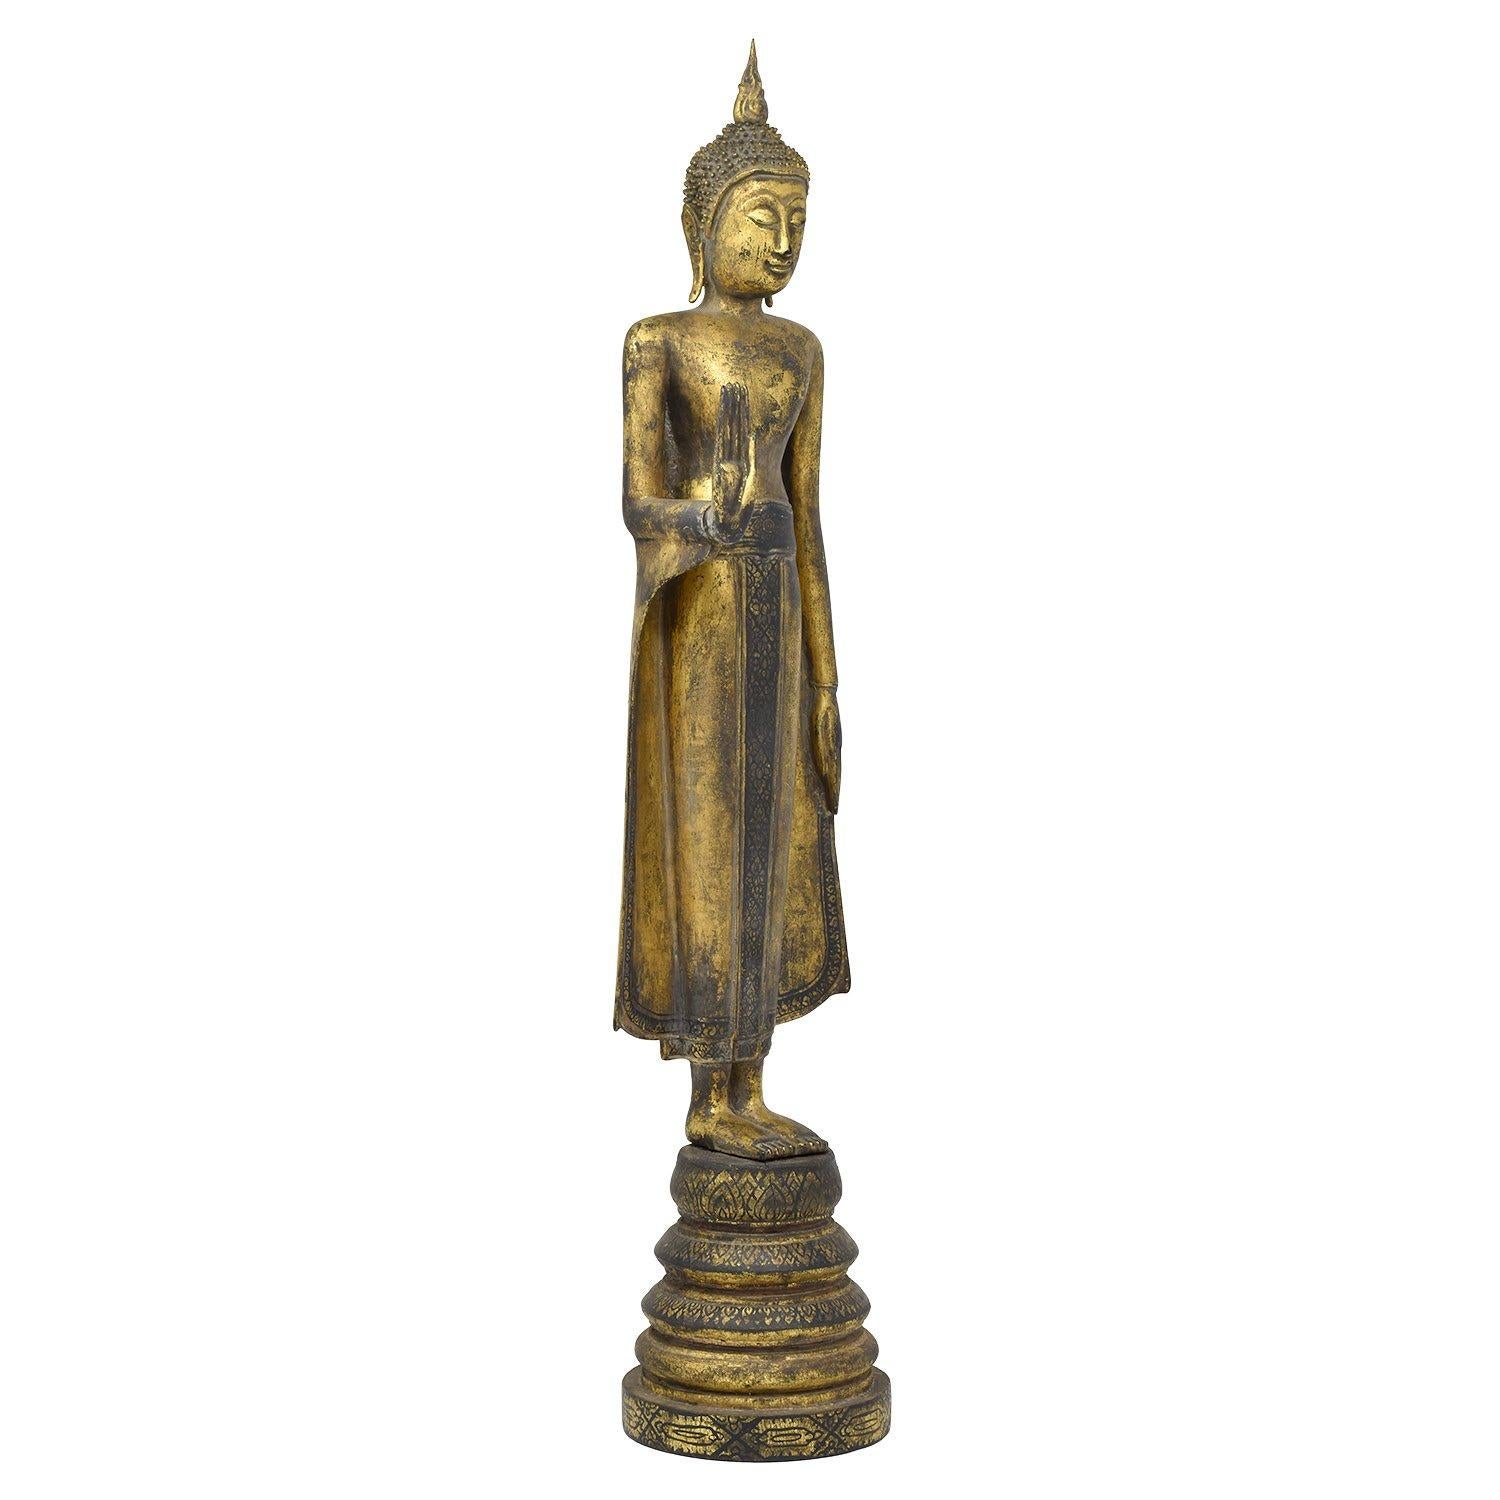 Standing buddha, Thailand.

Thailand
Wood, lacquer
Late 20th century
Measures: 24 x 5.5 x 4.5 in. / 61 x 14 x 12 cm.